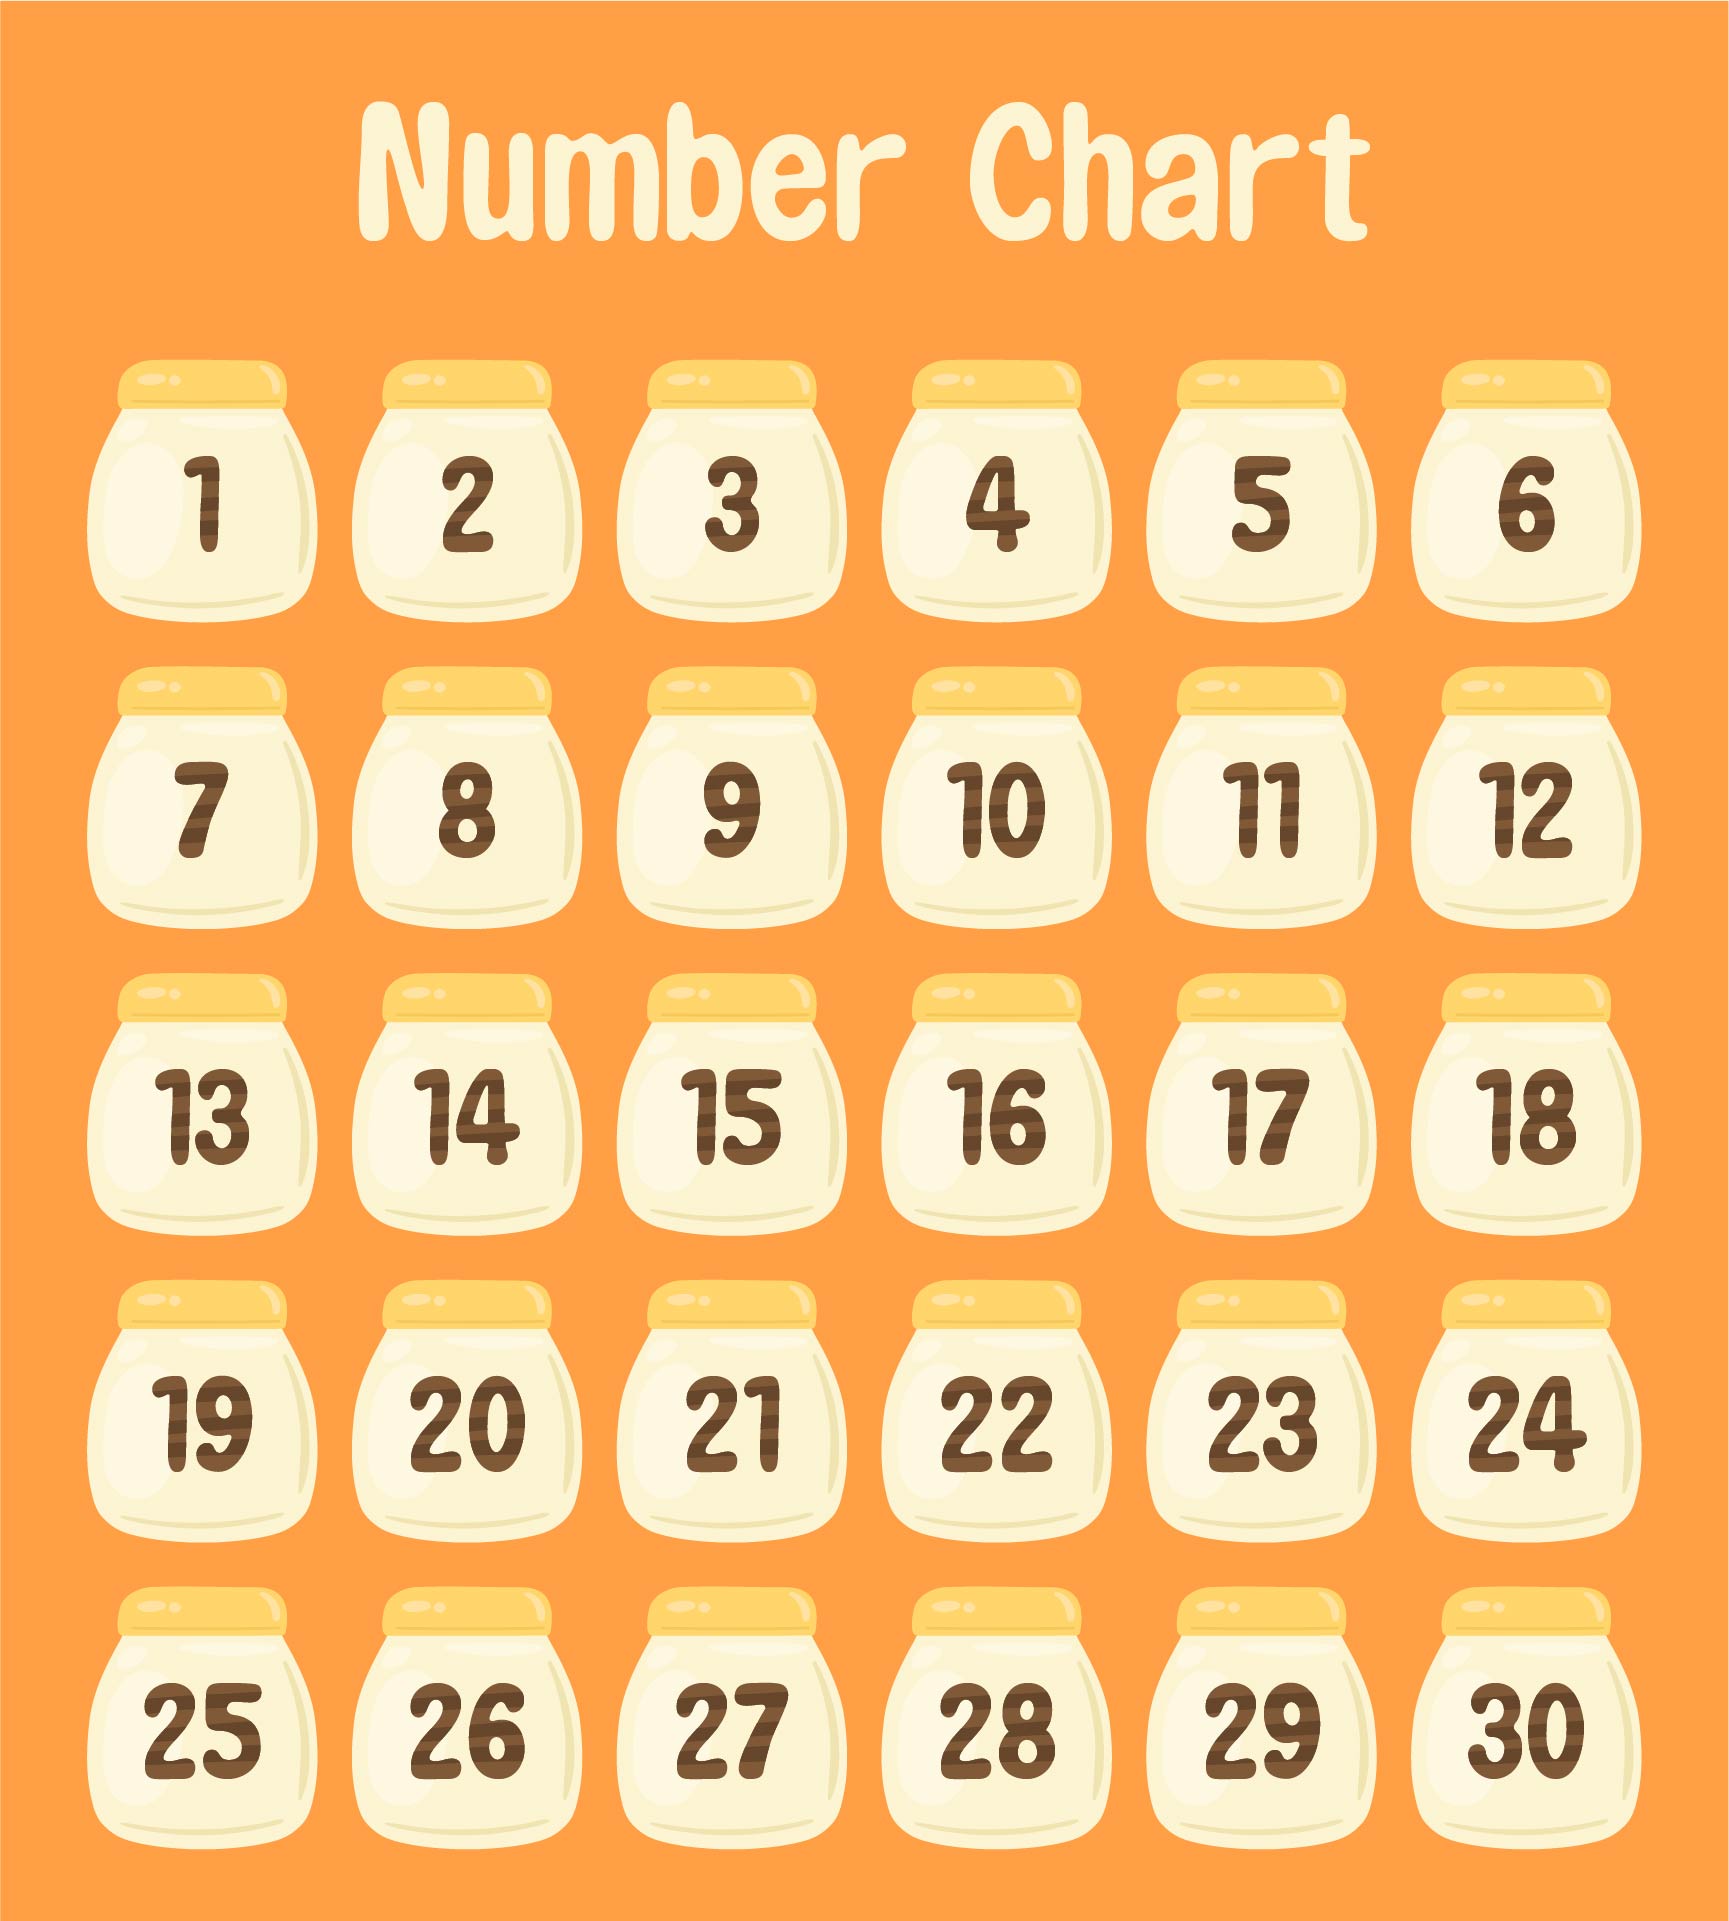 7 Best Images of Printable Number Chart 1 30 - Number Chart 1 20